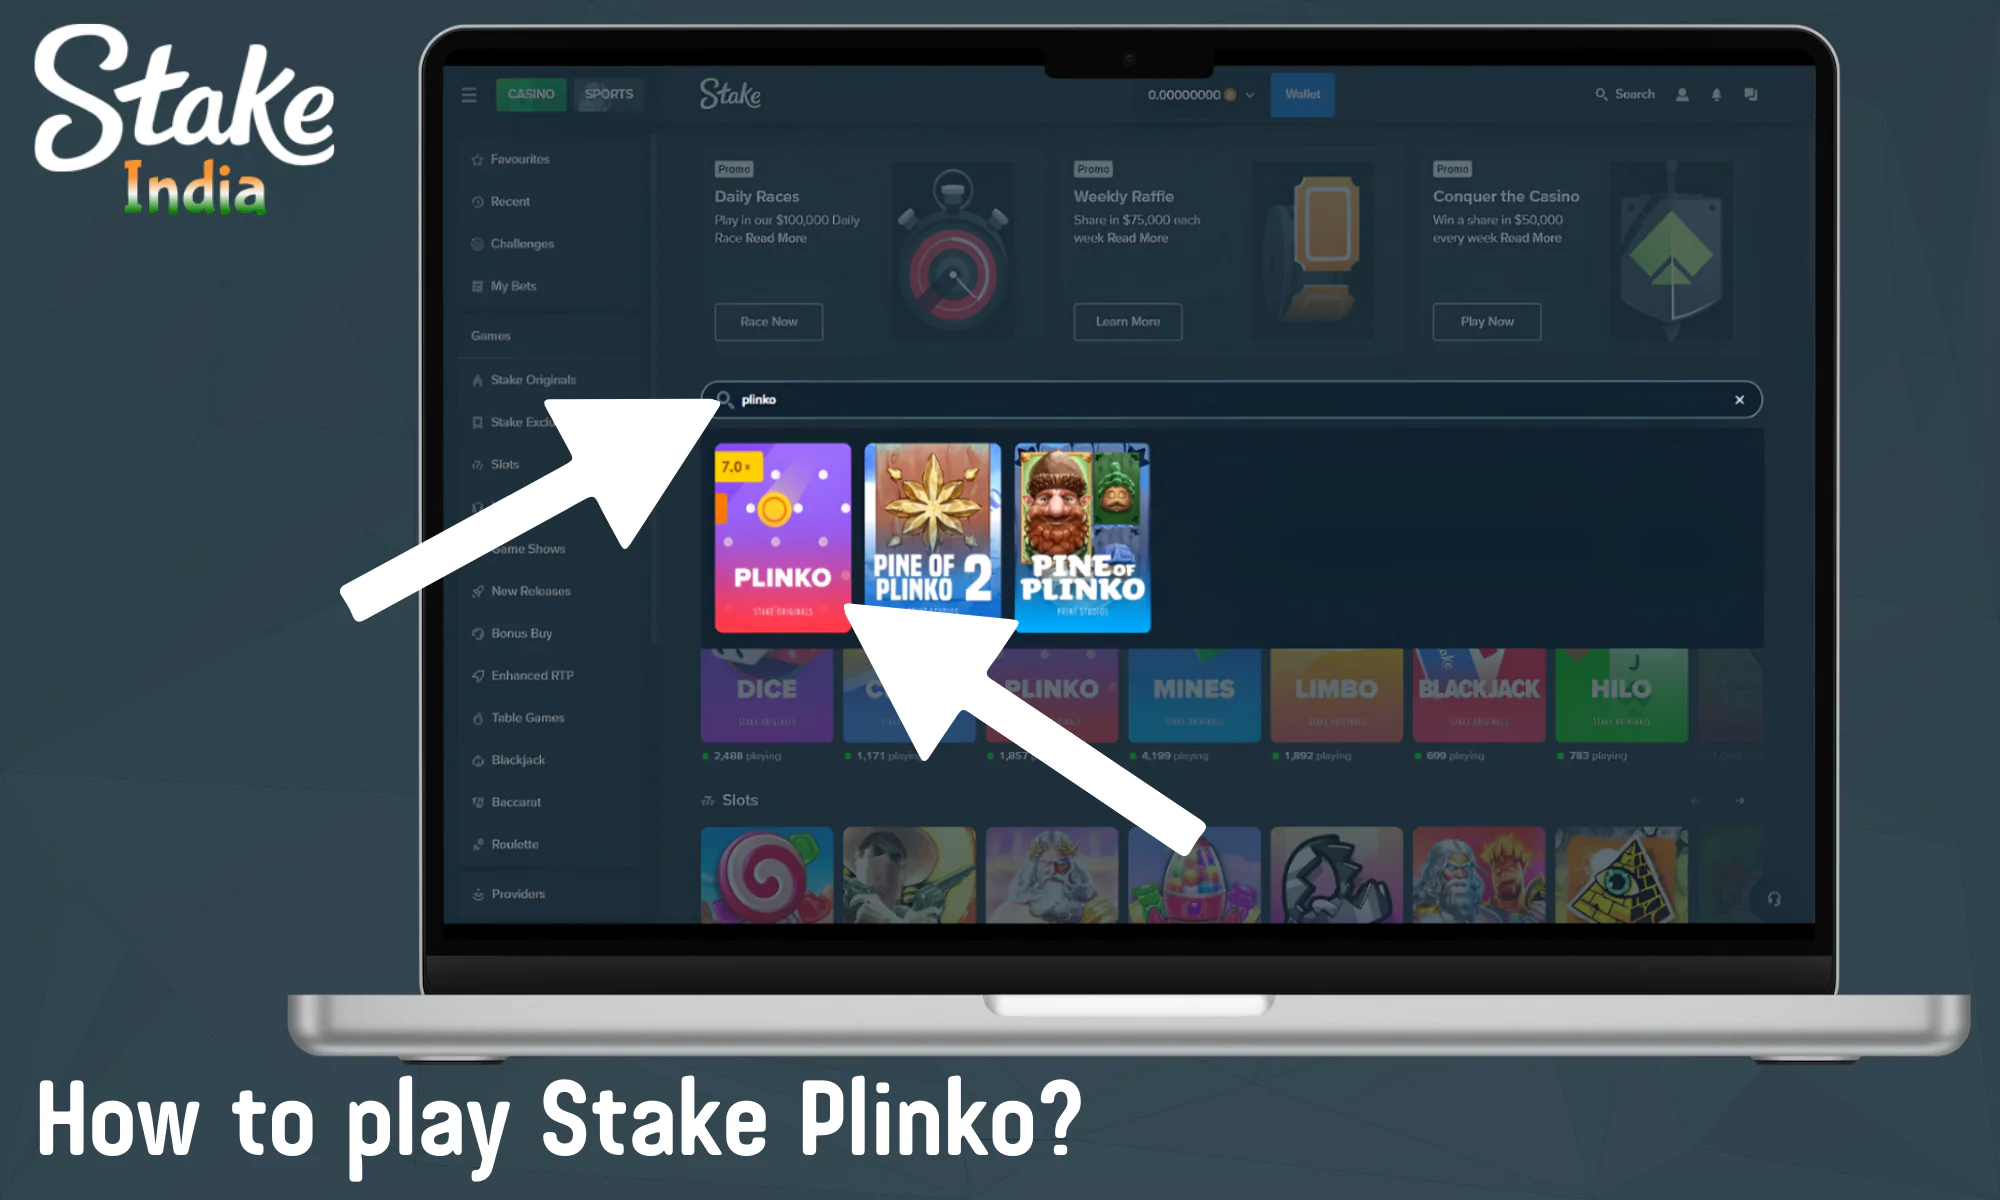 Step-by-step instructions on how to start playing Stake Plinko